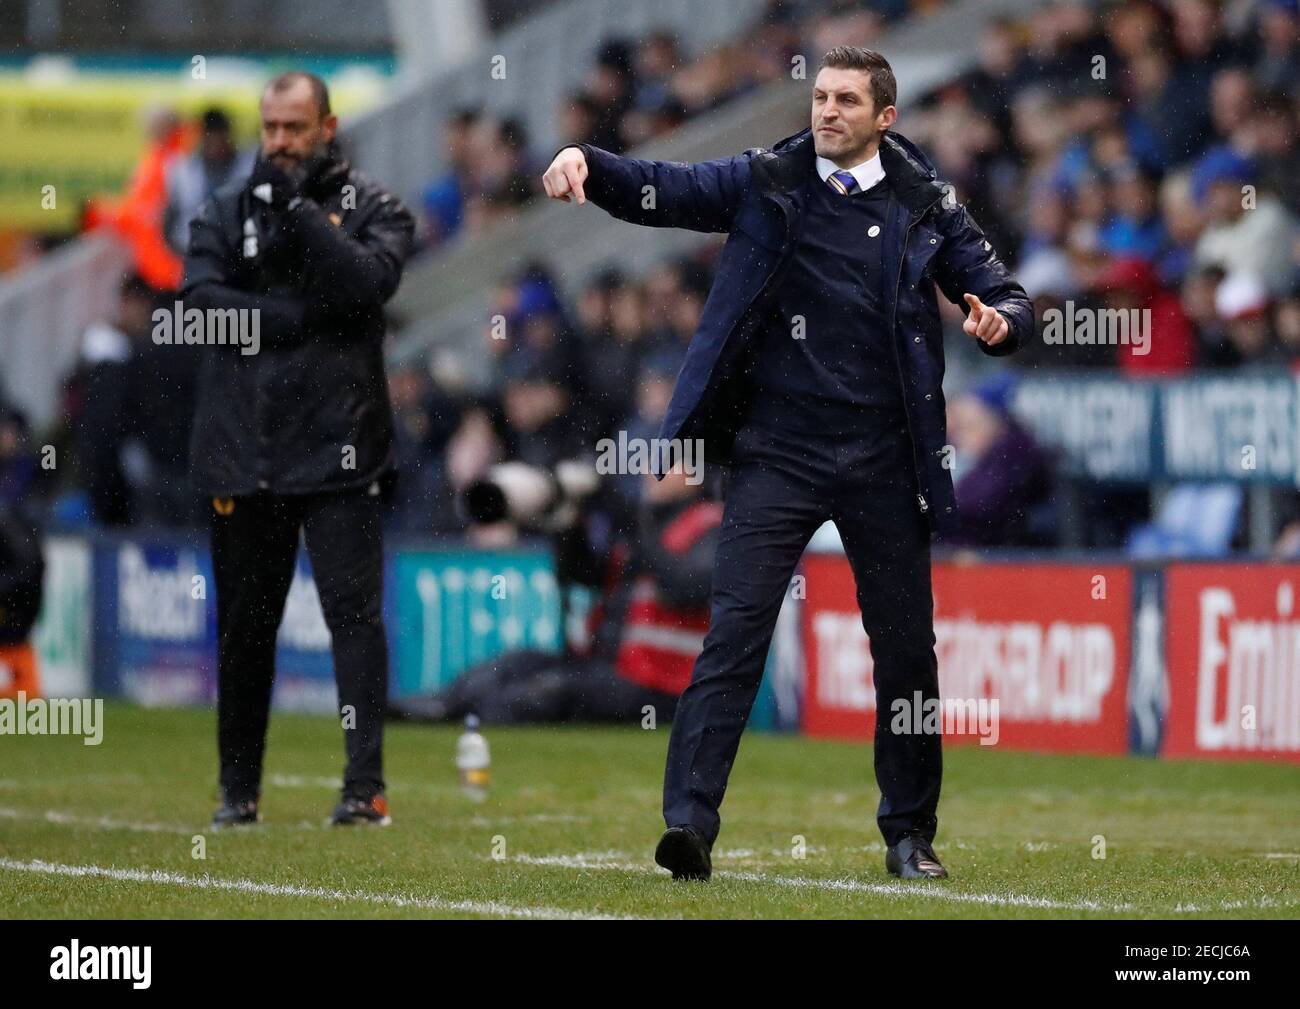 Soccer Football - FA Cup Fourth Round - Shrewsbury Town v Wolverhampton Wanderers  - Montgomery Waters Meadow, Shrewsbury, Britain - January 26, 2019  Woking manager Alan Dowson and Shrewsbury Town manager Sam Ricketts during the match       Action Images via Reuters/Carl Recine Stock Photo